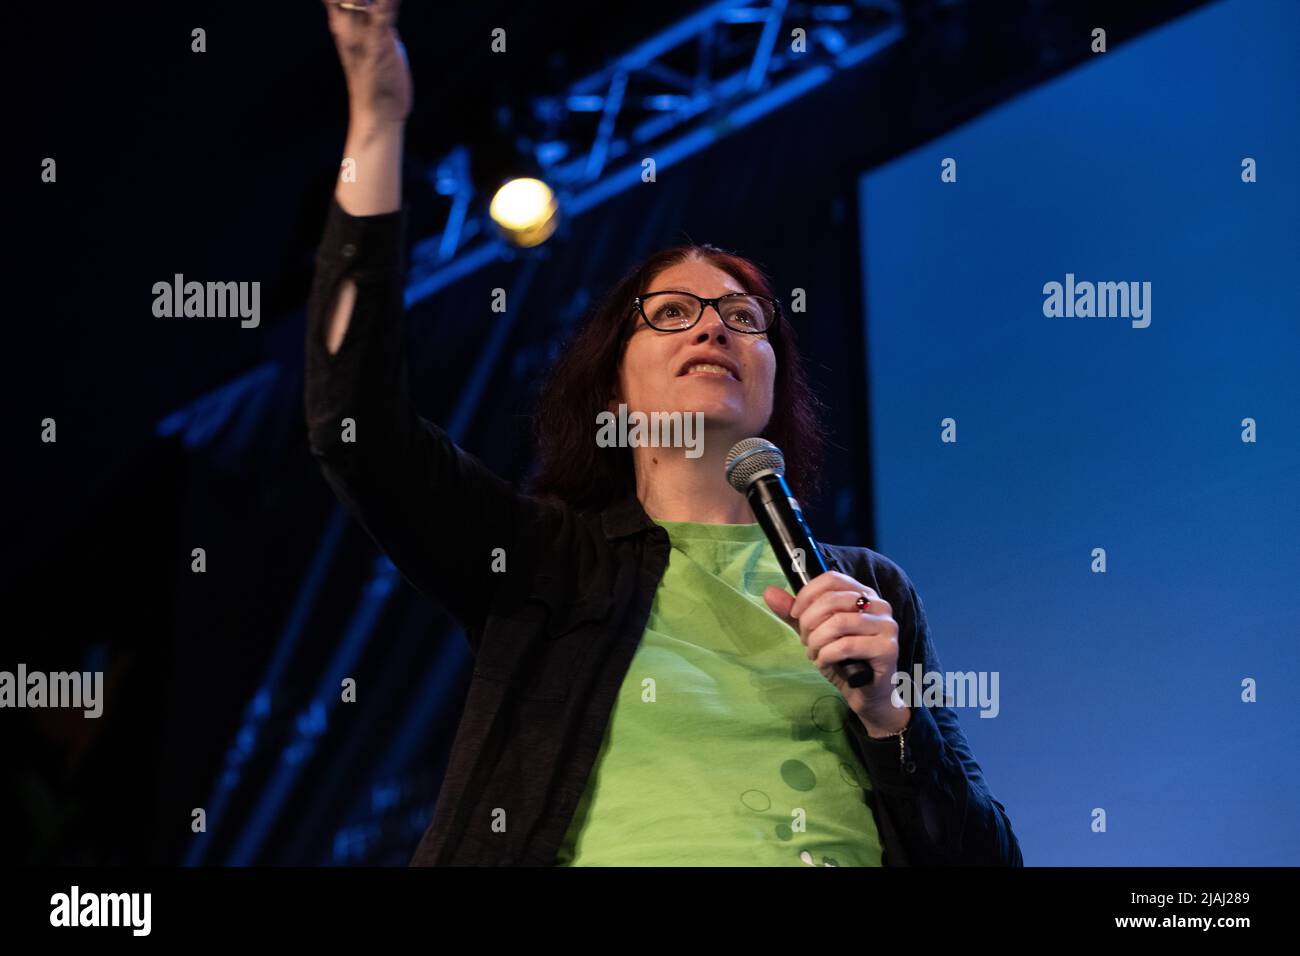 Hay-on-Wye, Wales, UK. 30th May, 2022. Natalie Haynes performing stand-up comedy at Hay Festival 2022, Wales. Credit: Sam Hardwick/Alamy. Stock Photo